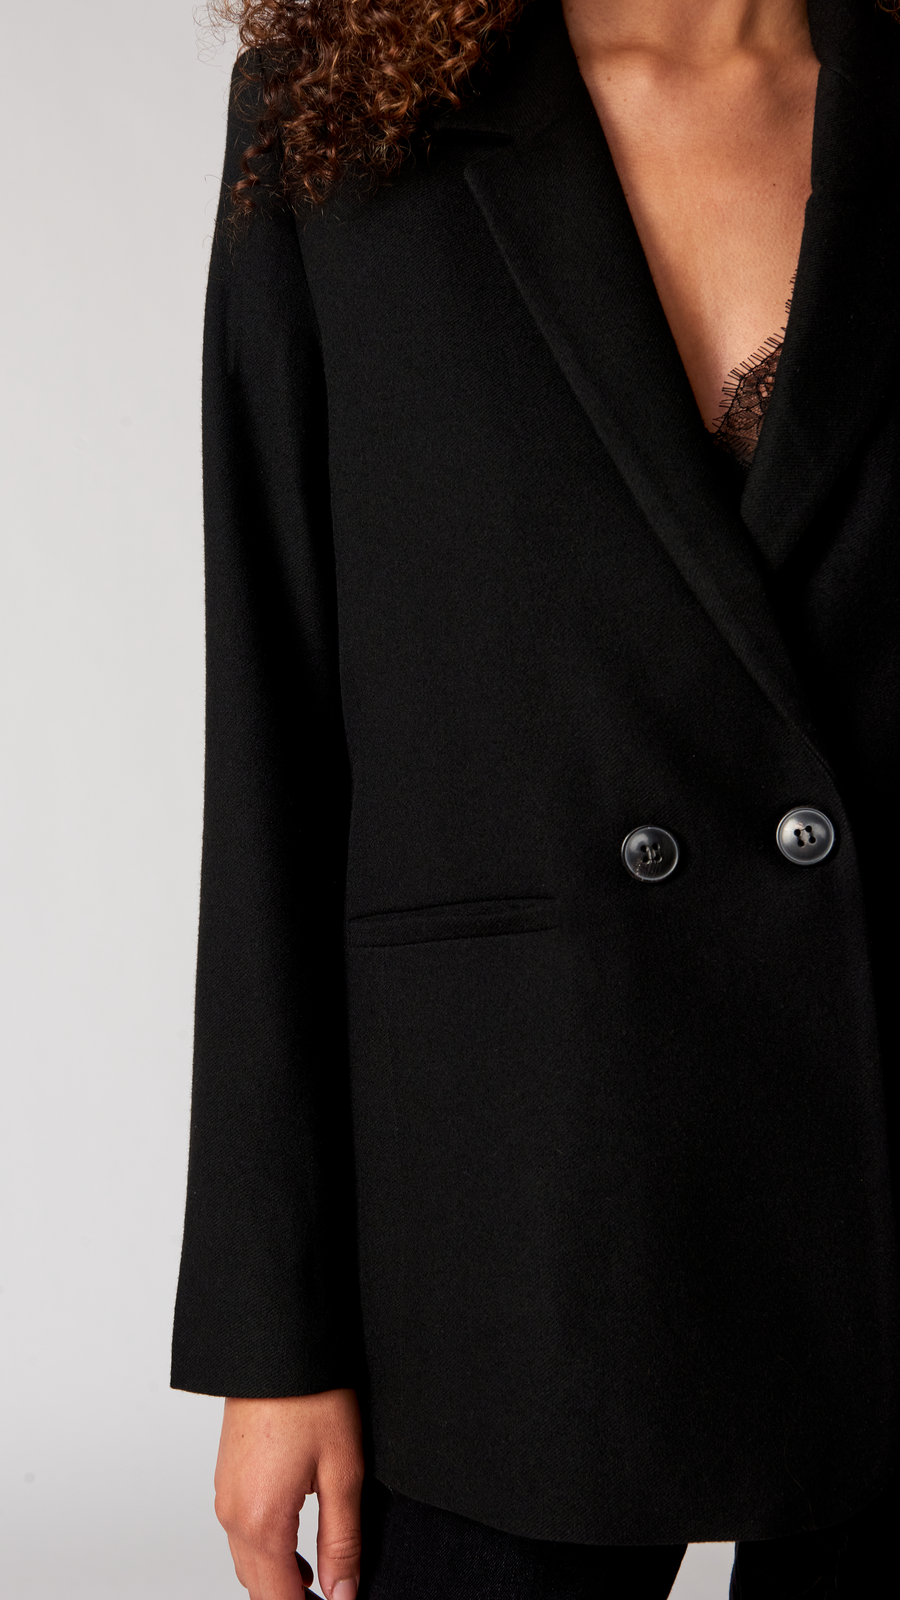 A close up detail of a black blazer with two buttons on it.